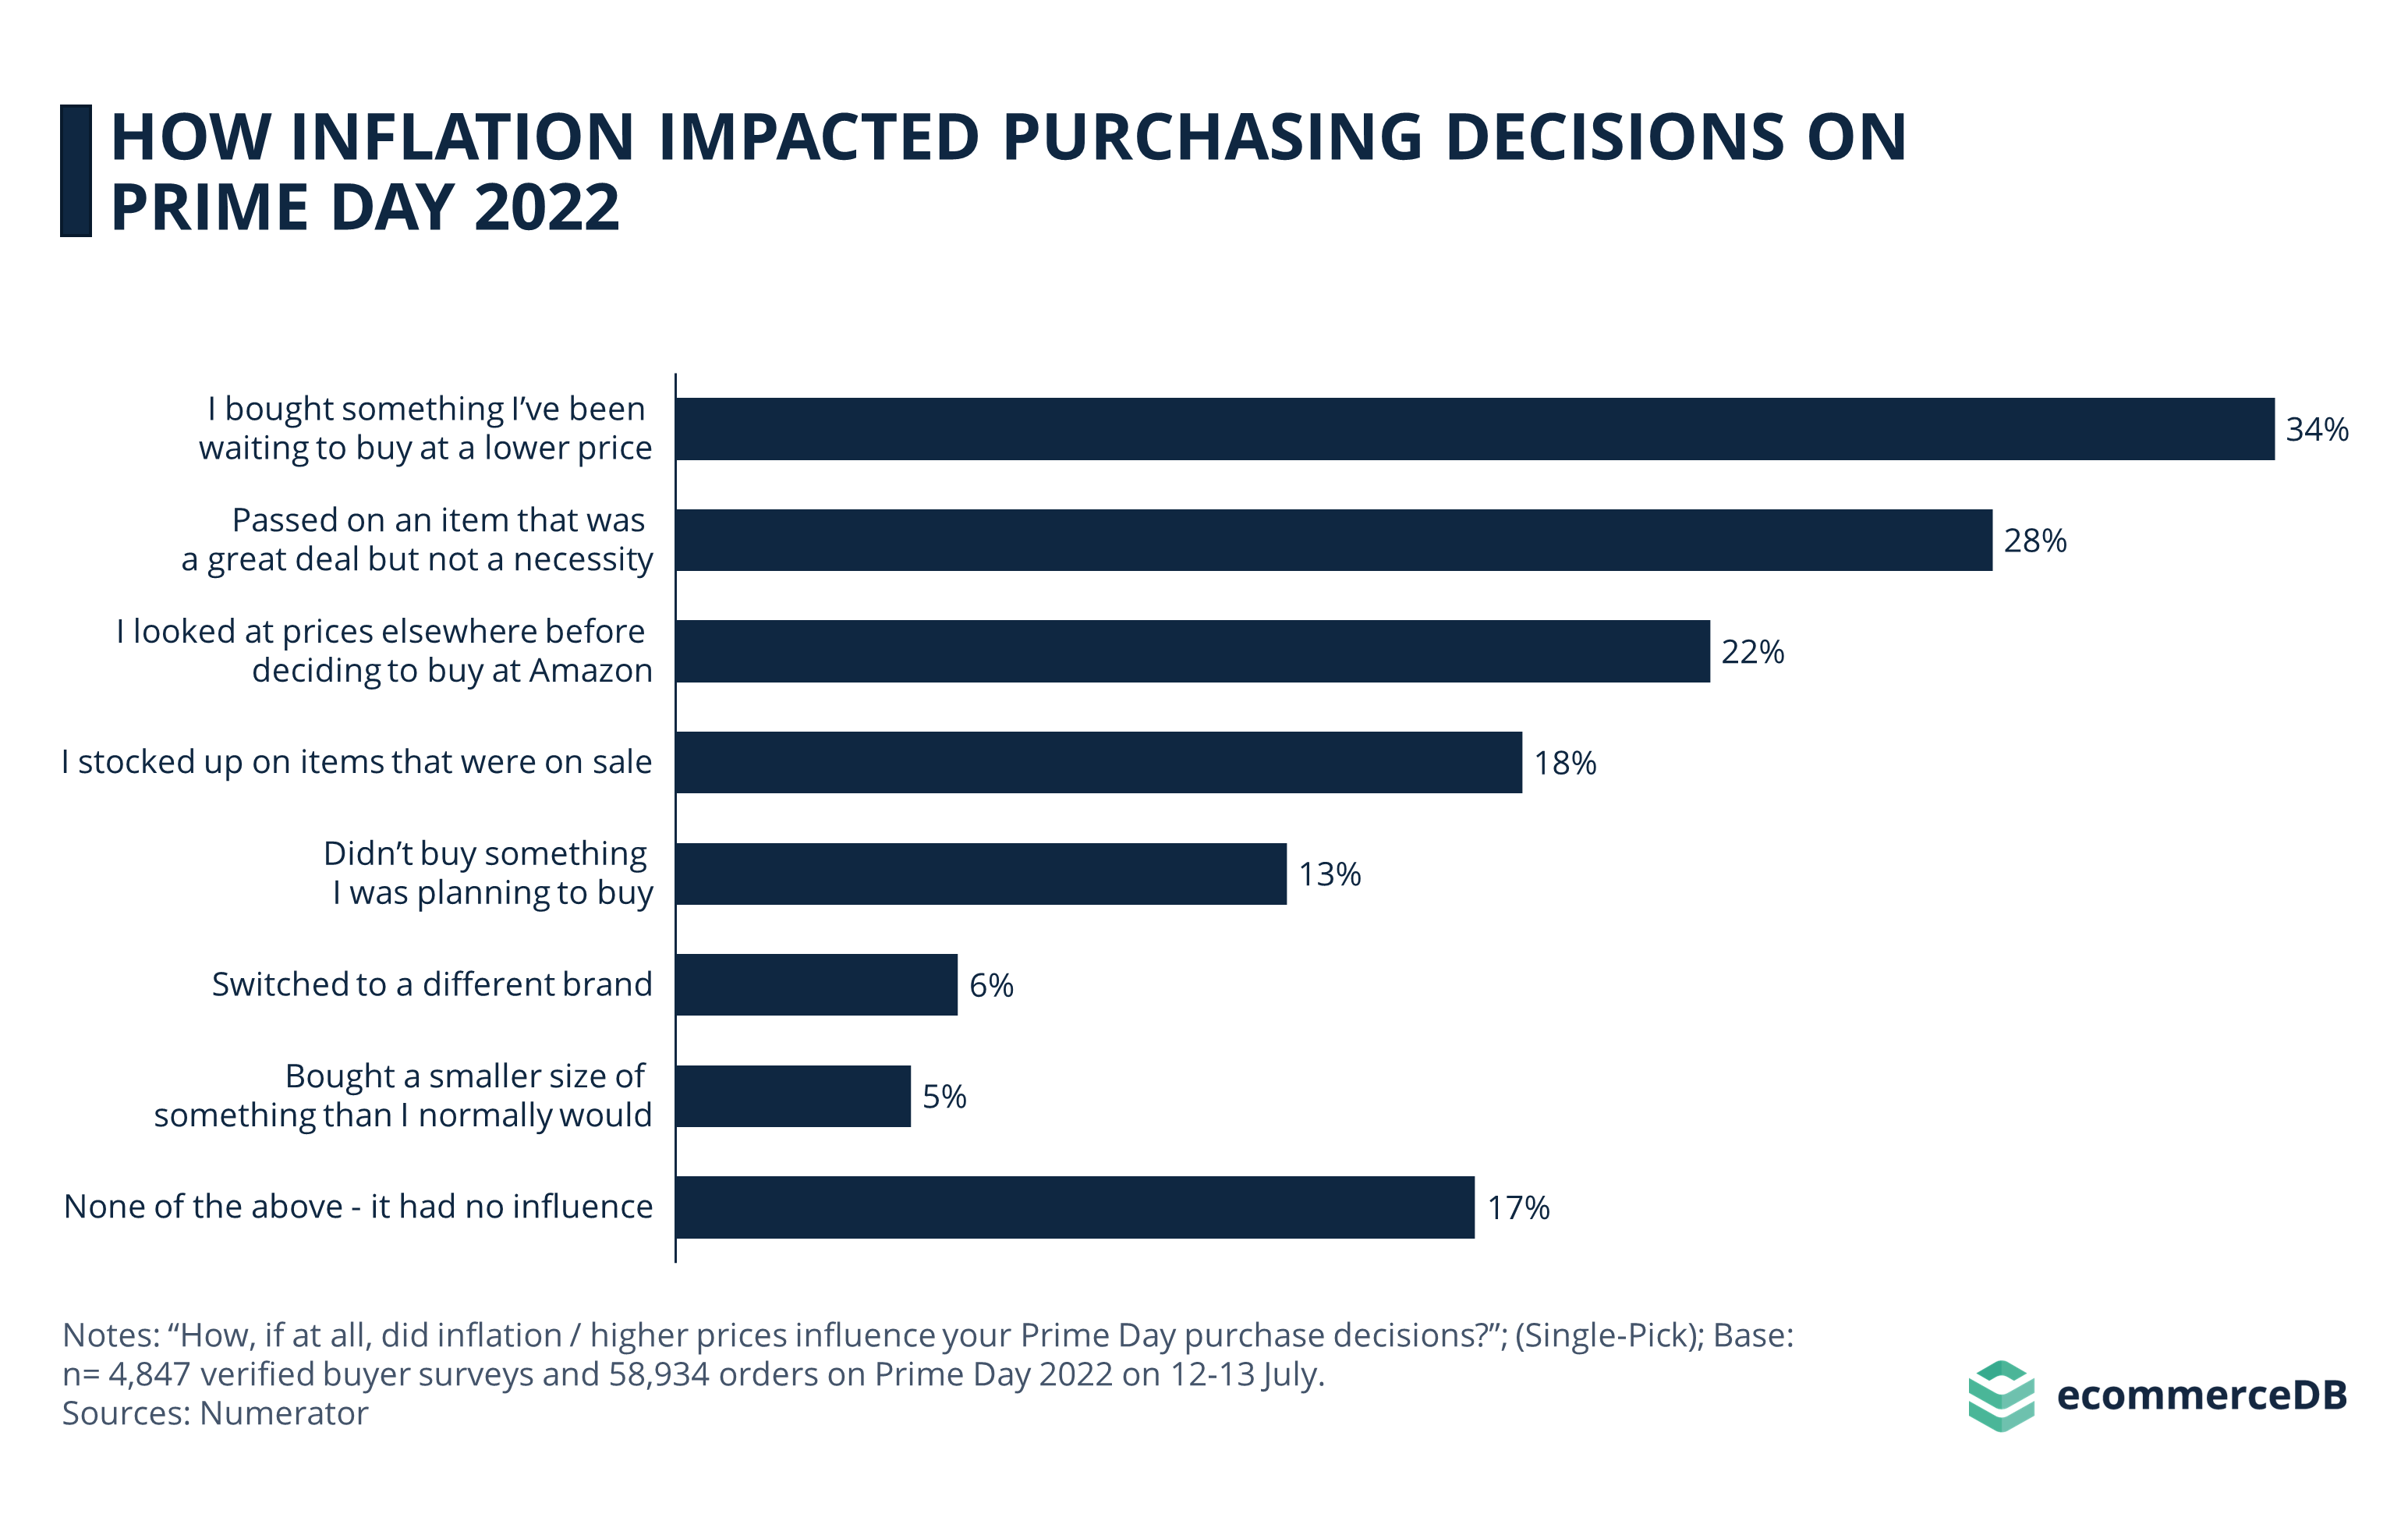 Inflation Impact on Prime Day 2022 Purchase Decisions